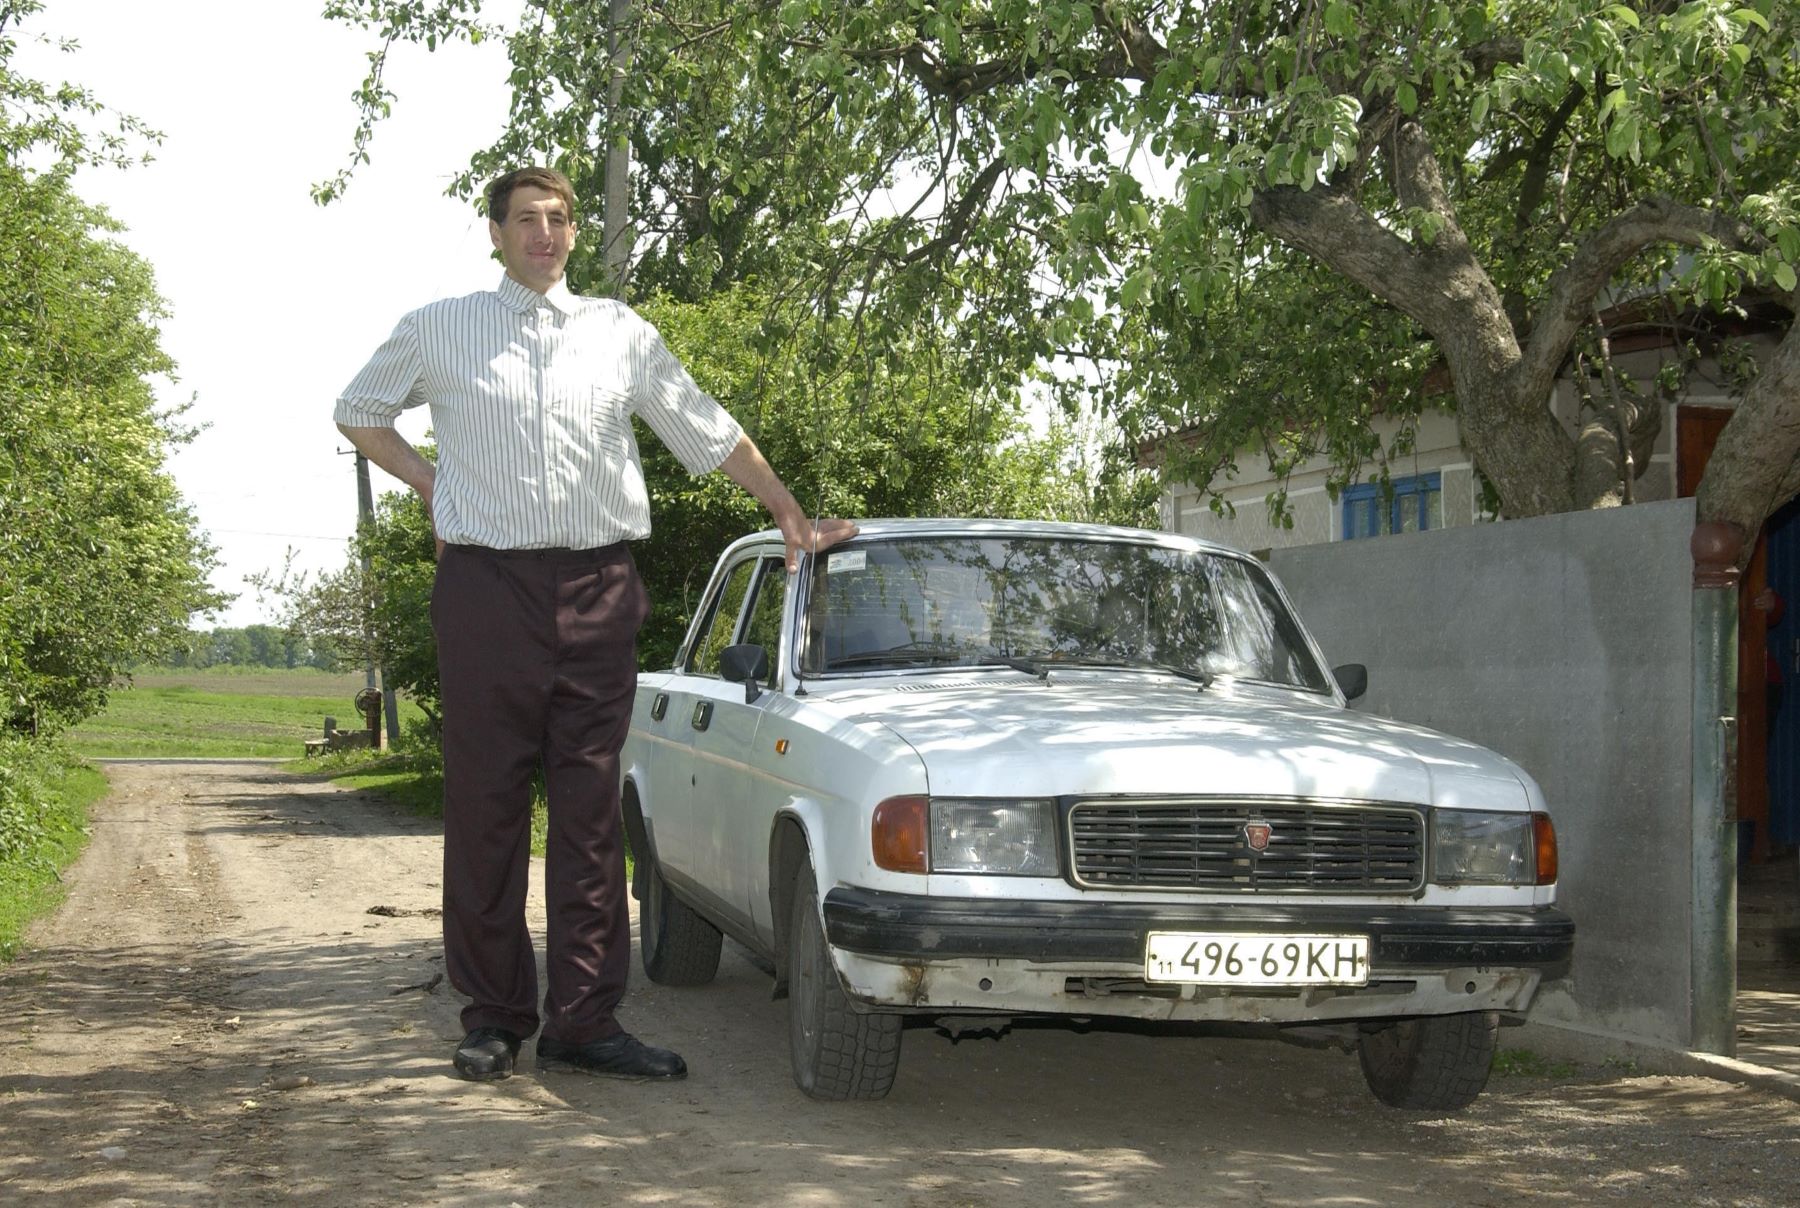 The reported tallest man in the world from Ukraine standing next to a Russian Volga car model